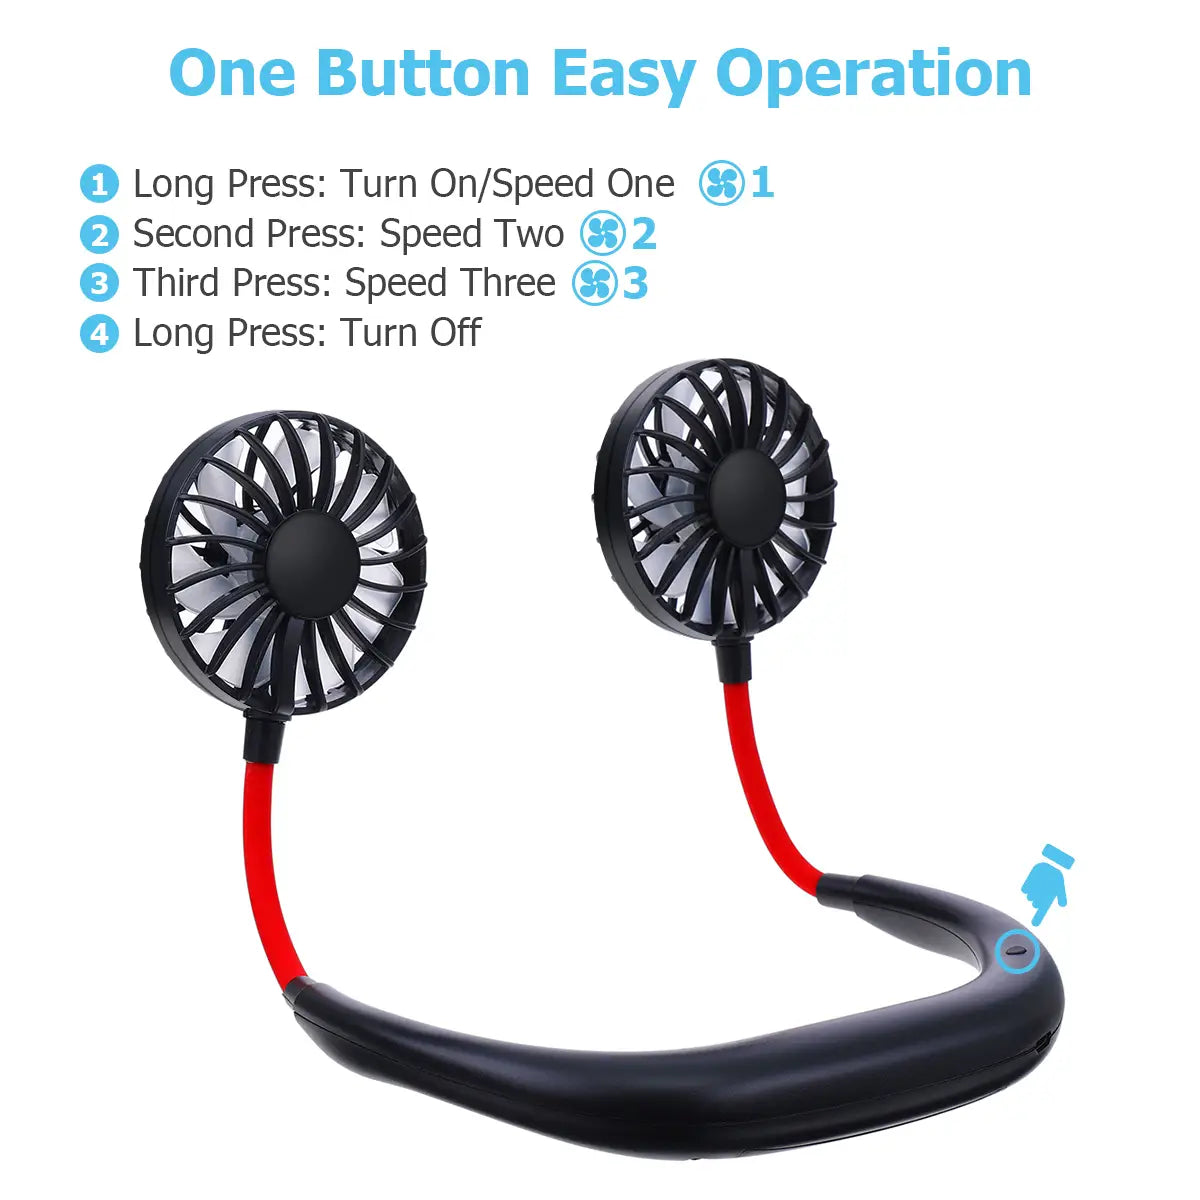 Portable Mini Fan Neckband Lazy Neck Hanging Style Cooling